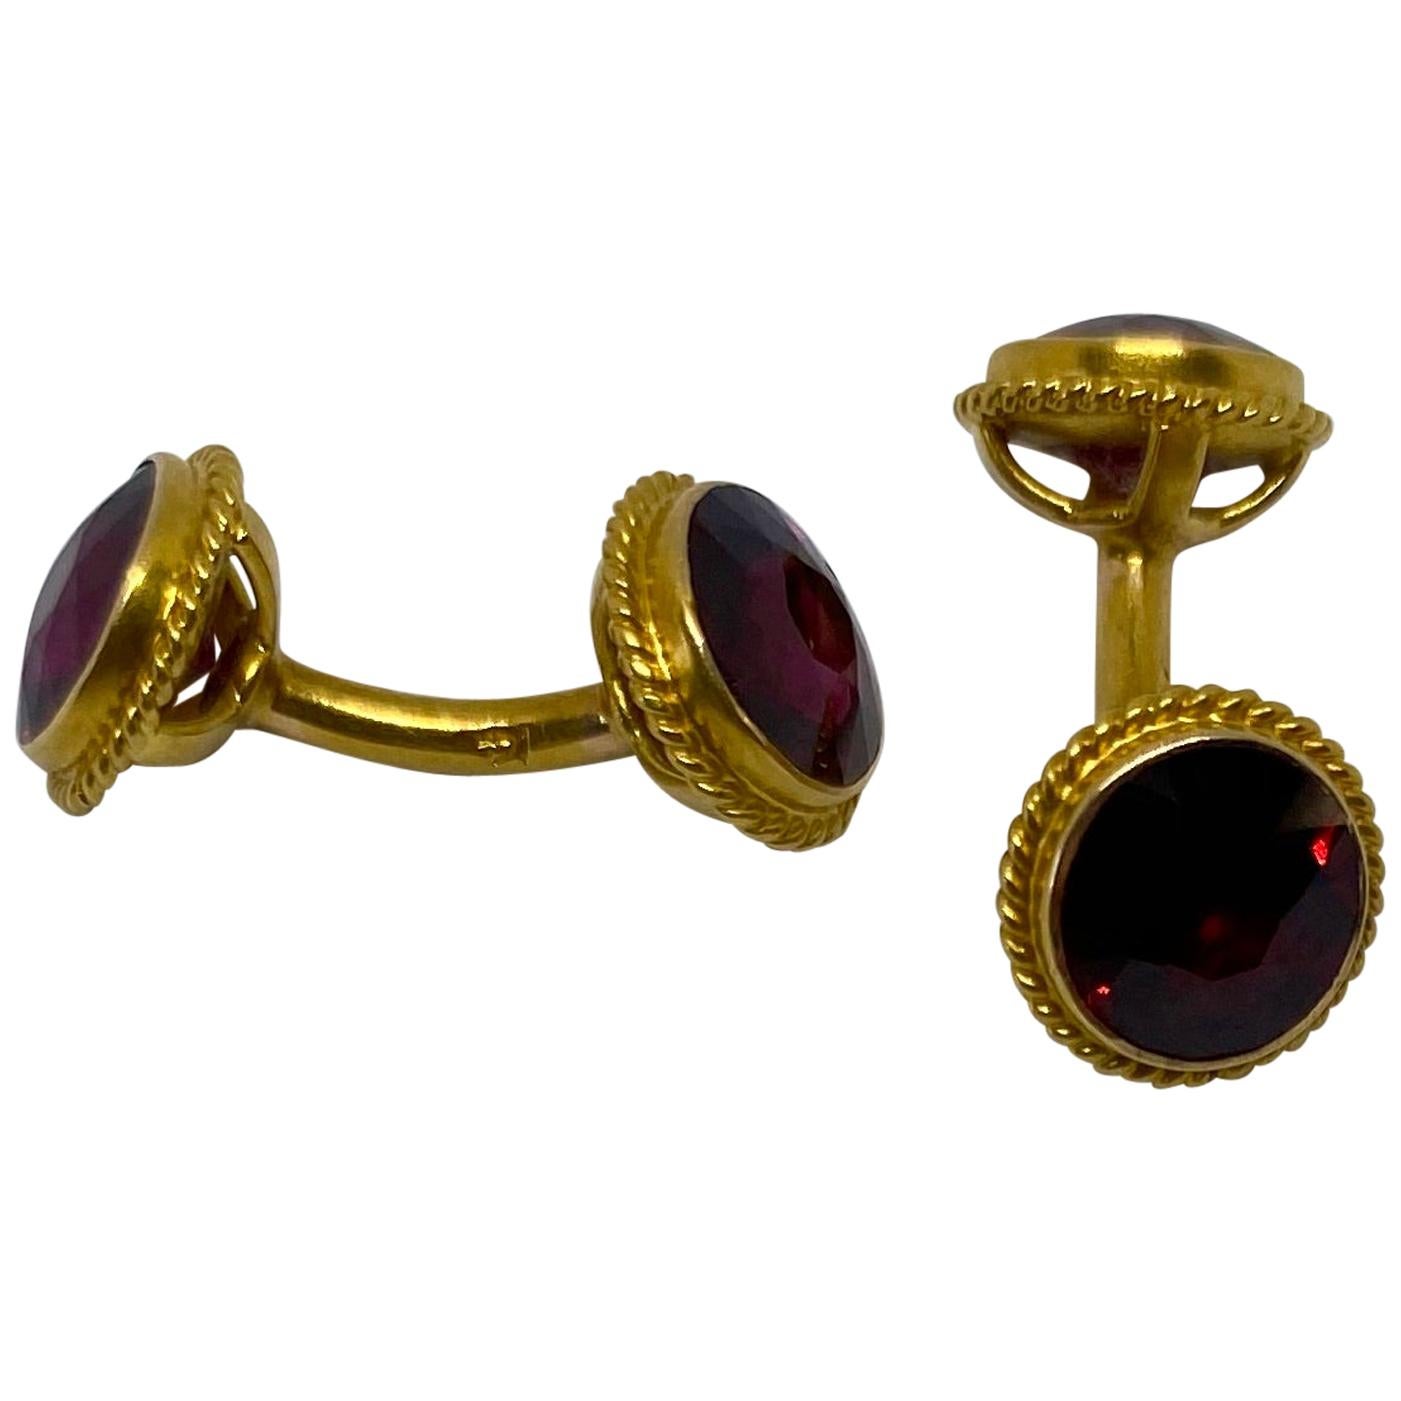 Antique Double-Sided Cufflinks with Faceted Garnets Set in 14 Karat Yellow Gold